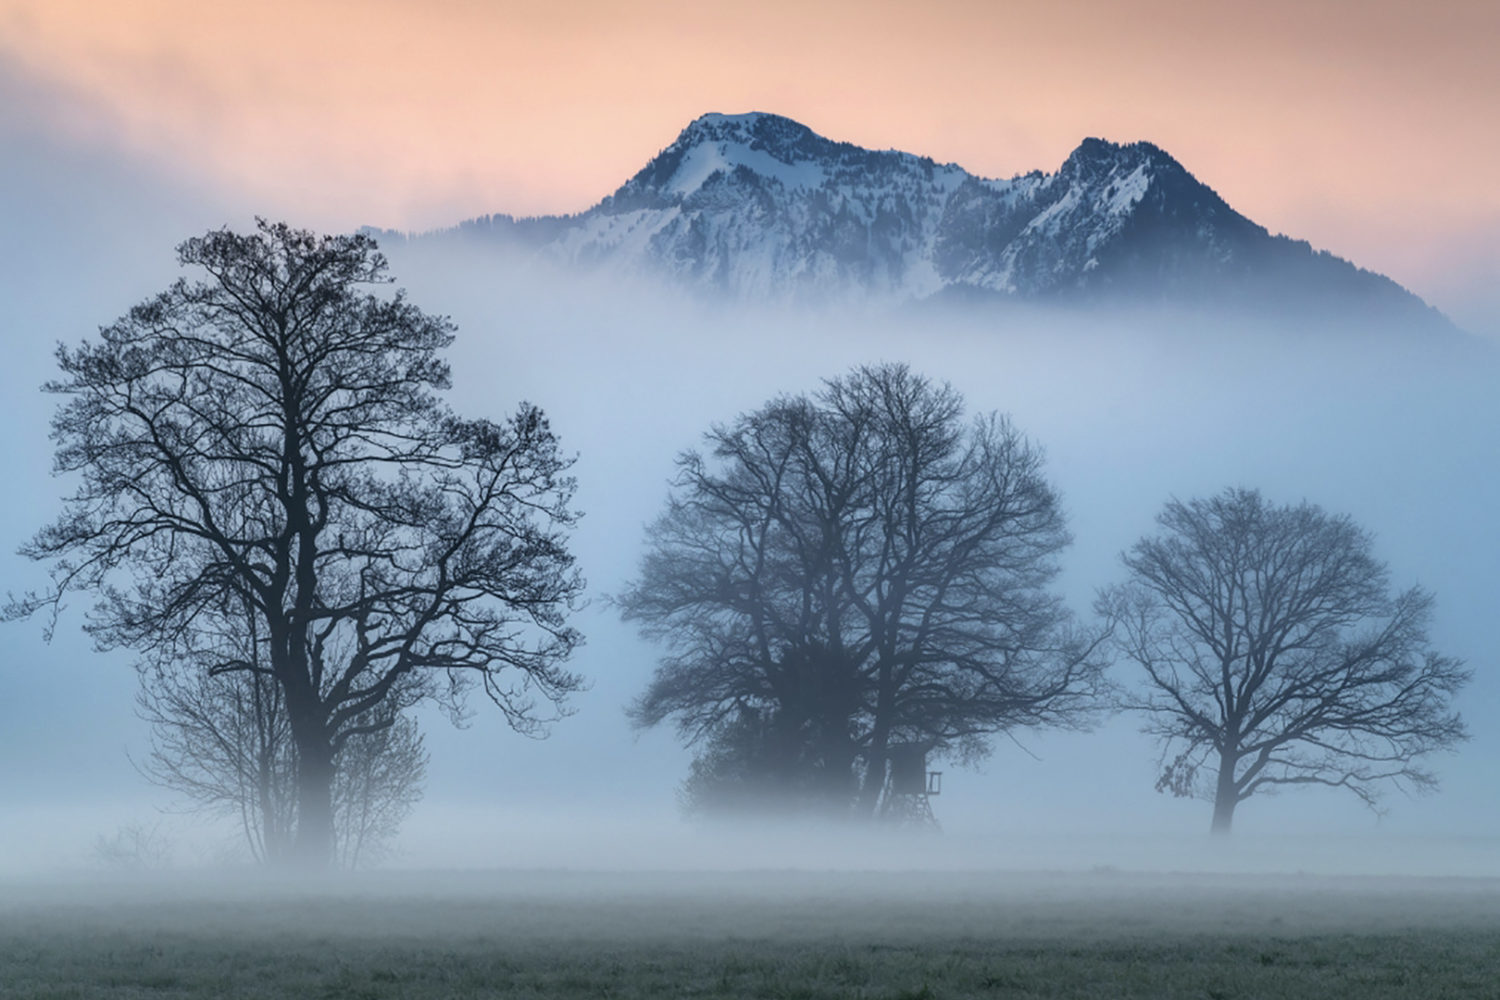 How to create ethereal photos on misty mornings